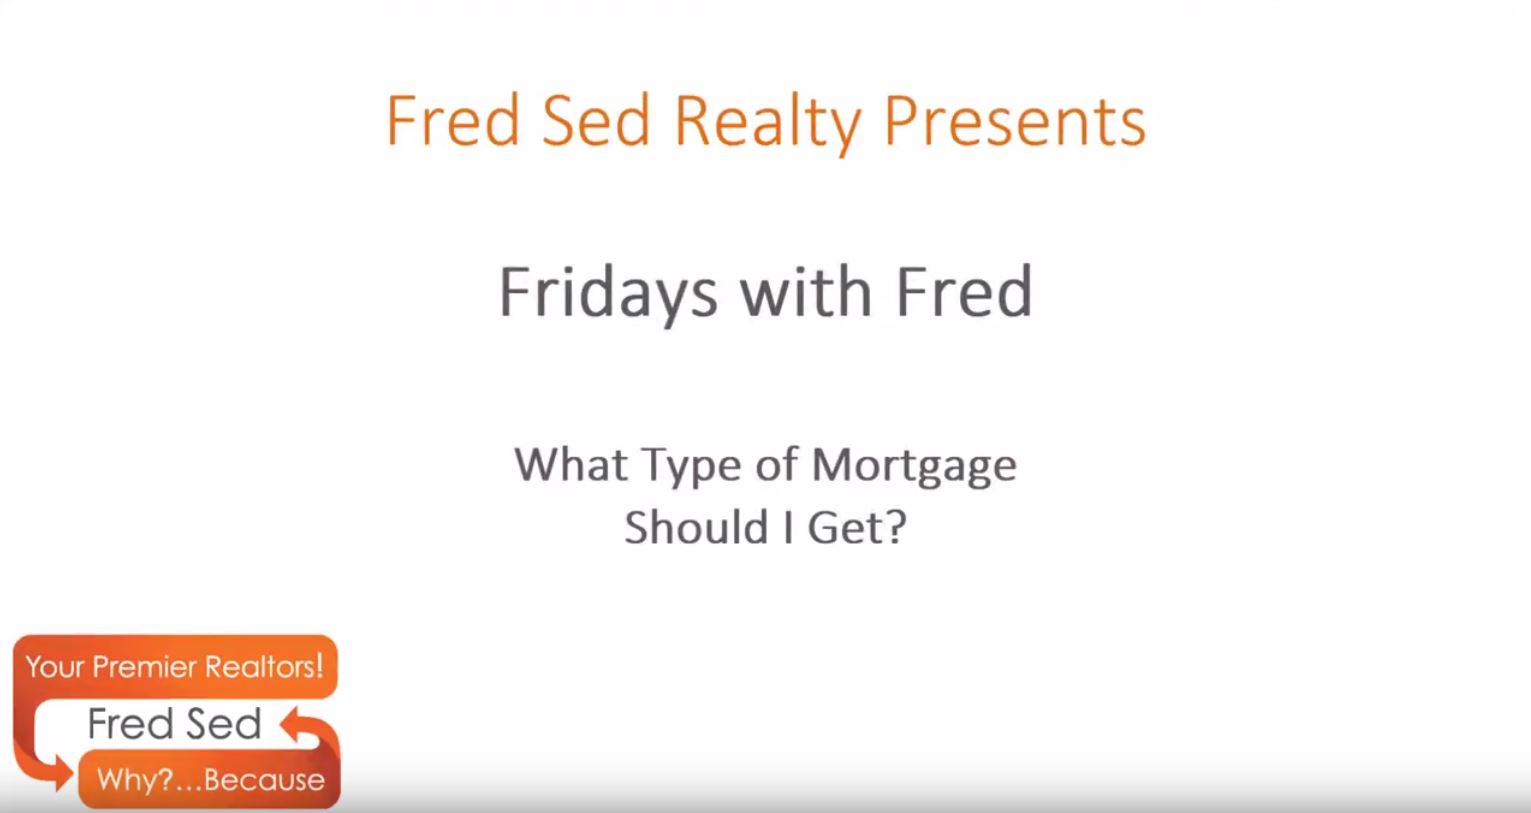 What_Type_of_Mortgage_Should_I_Get__Fridays_with_Fred.JPG